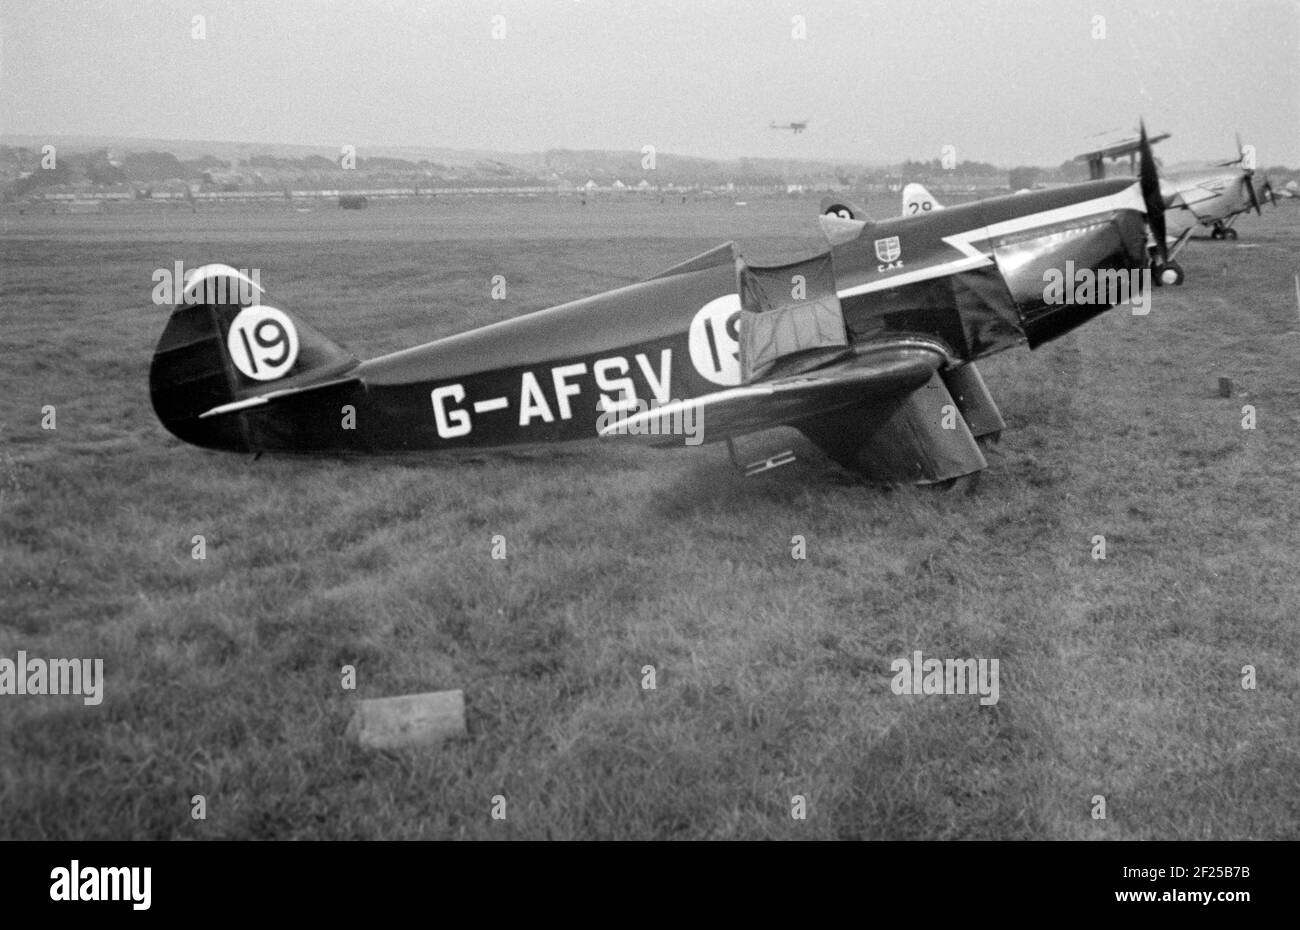 A Vintage 1950s black and white photograph of a Chilton DW. 1A light aircraft, manufactured in England. Registration number G-AFSV. Stock Photo